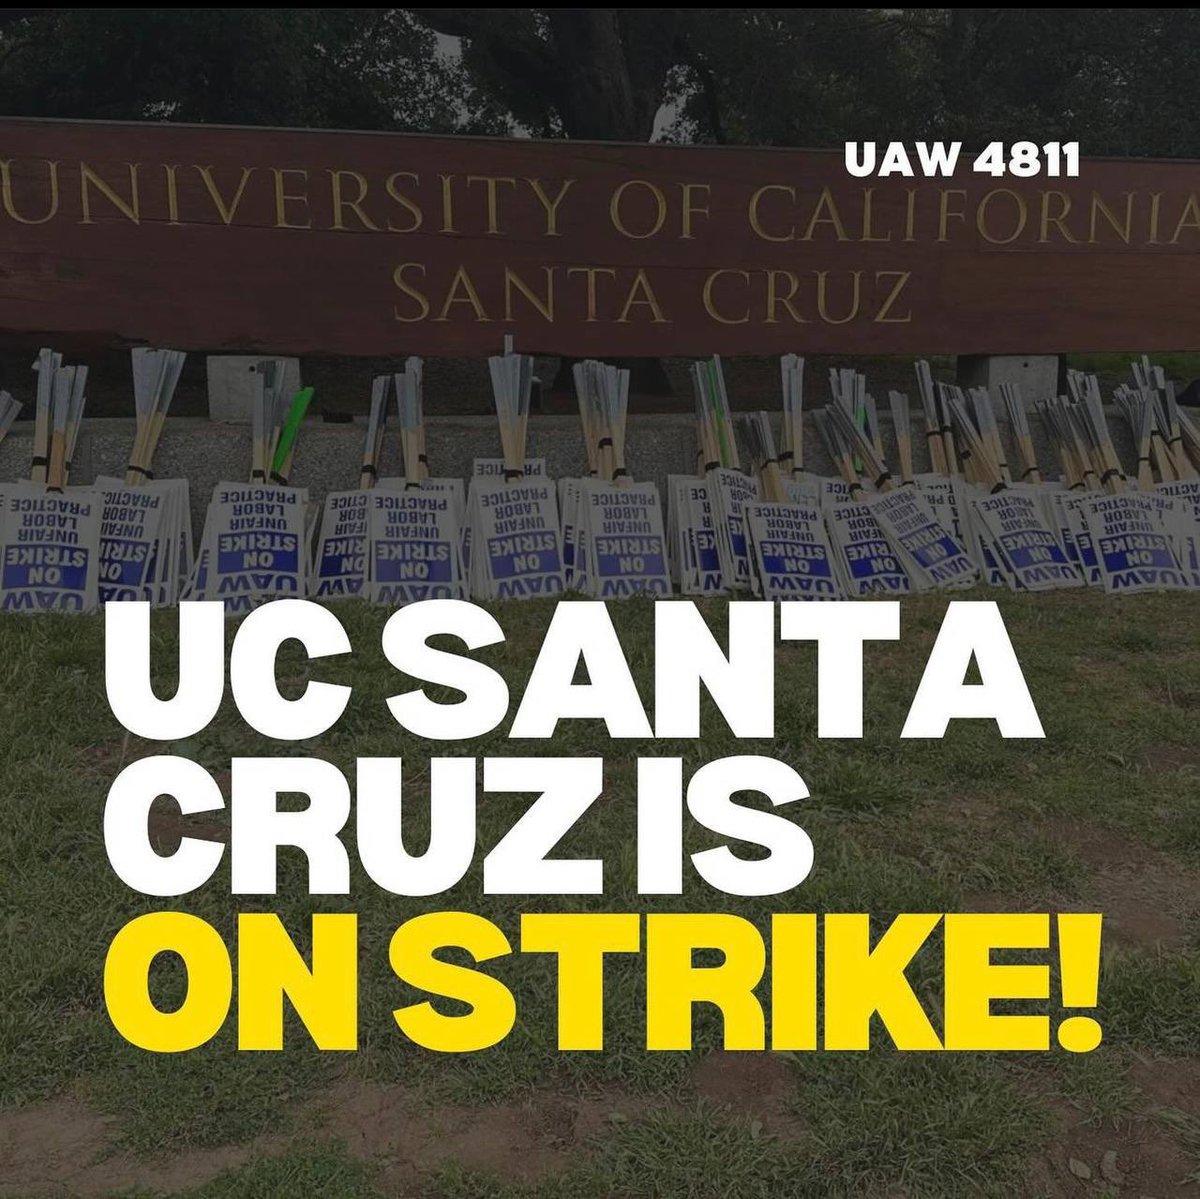 UAW 4811 UC Santa Cruz Strike | Today, UC Santa Cruz is the first UAW 4811’s ULP to strike in solidarity with the Marxist Communist Revolutionaries. UAW 4811 represents 48,000 university workers who voted to strike last week. The Palestinian protest movement aligns with